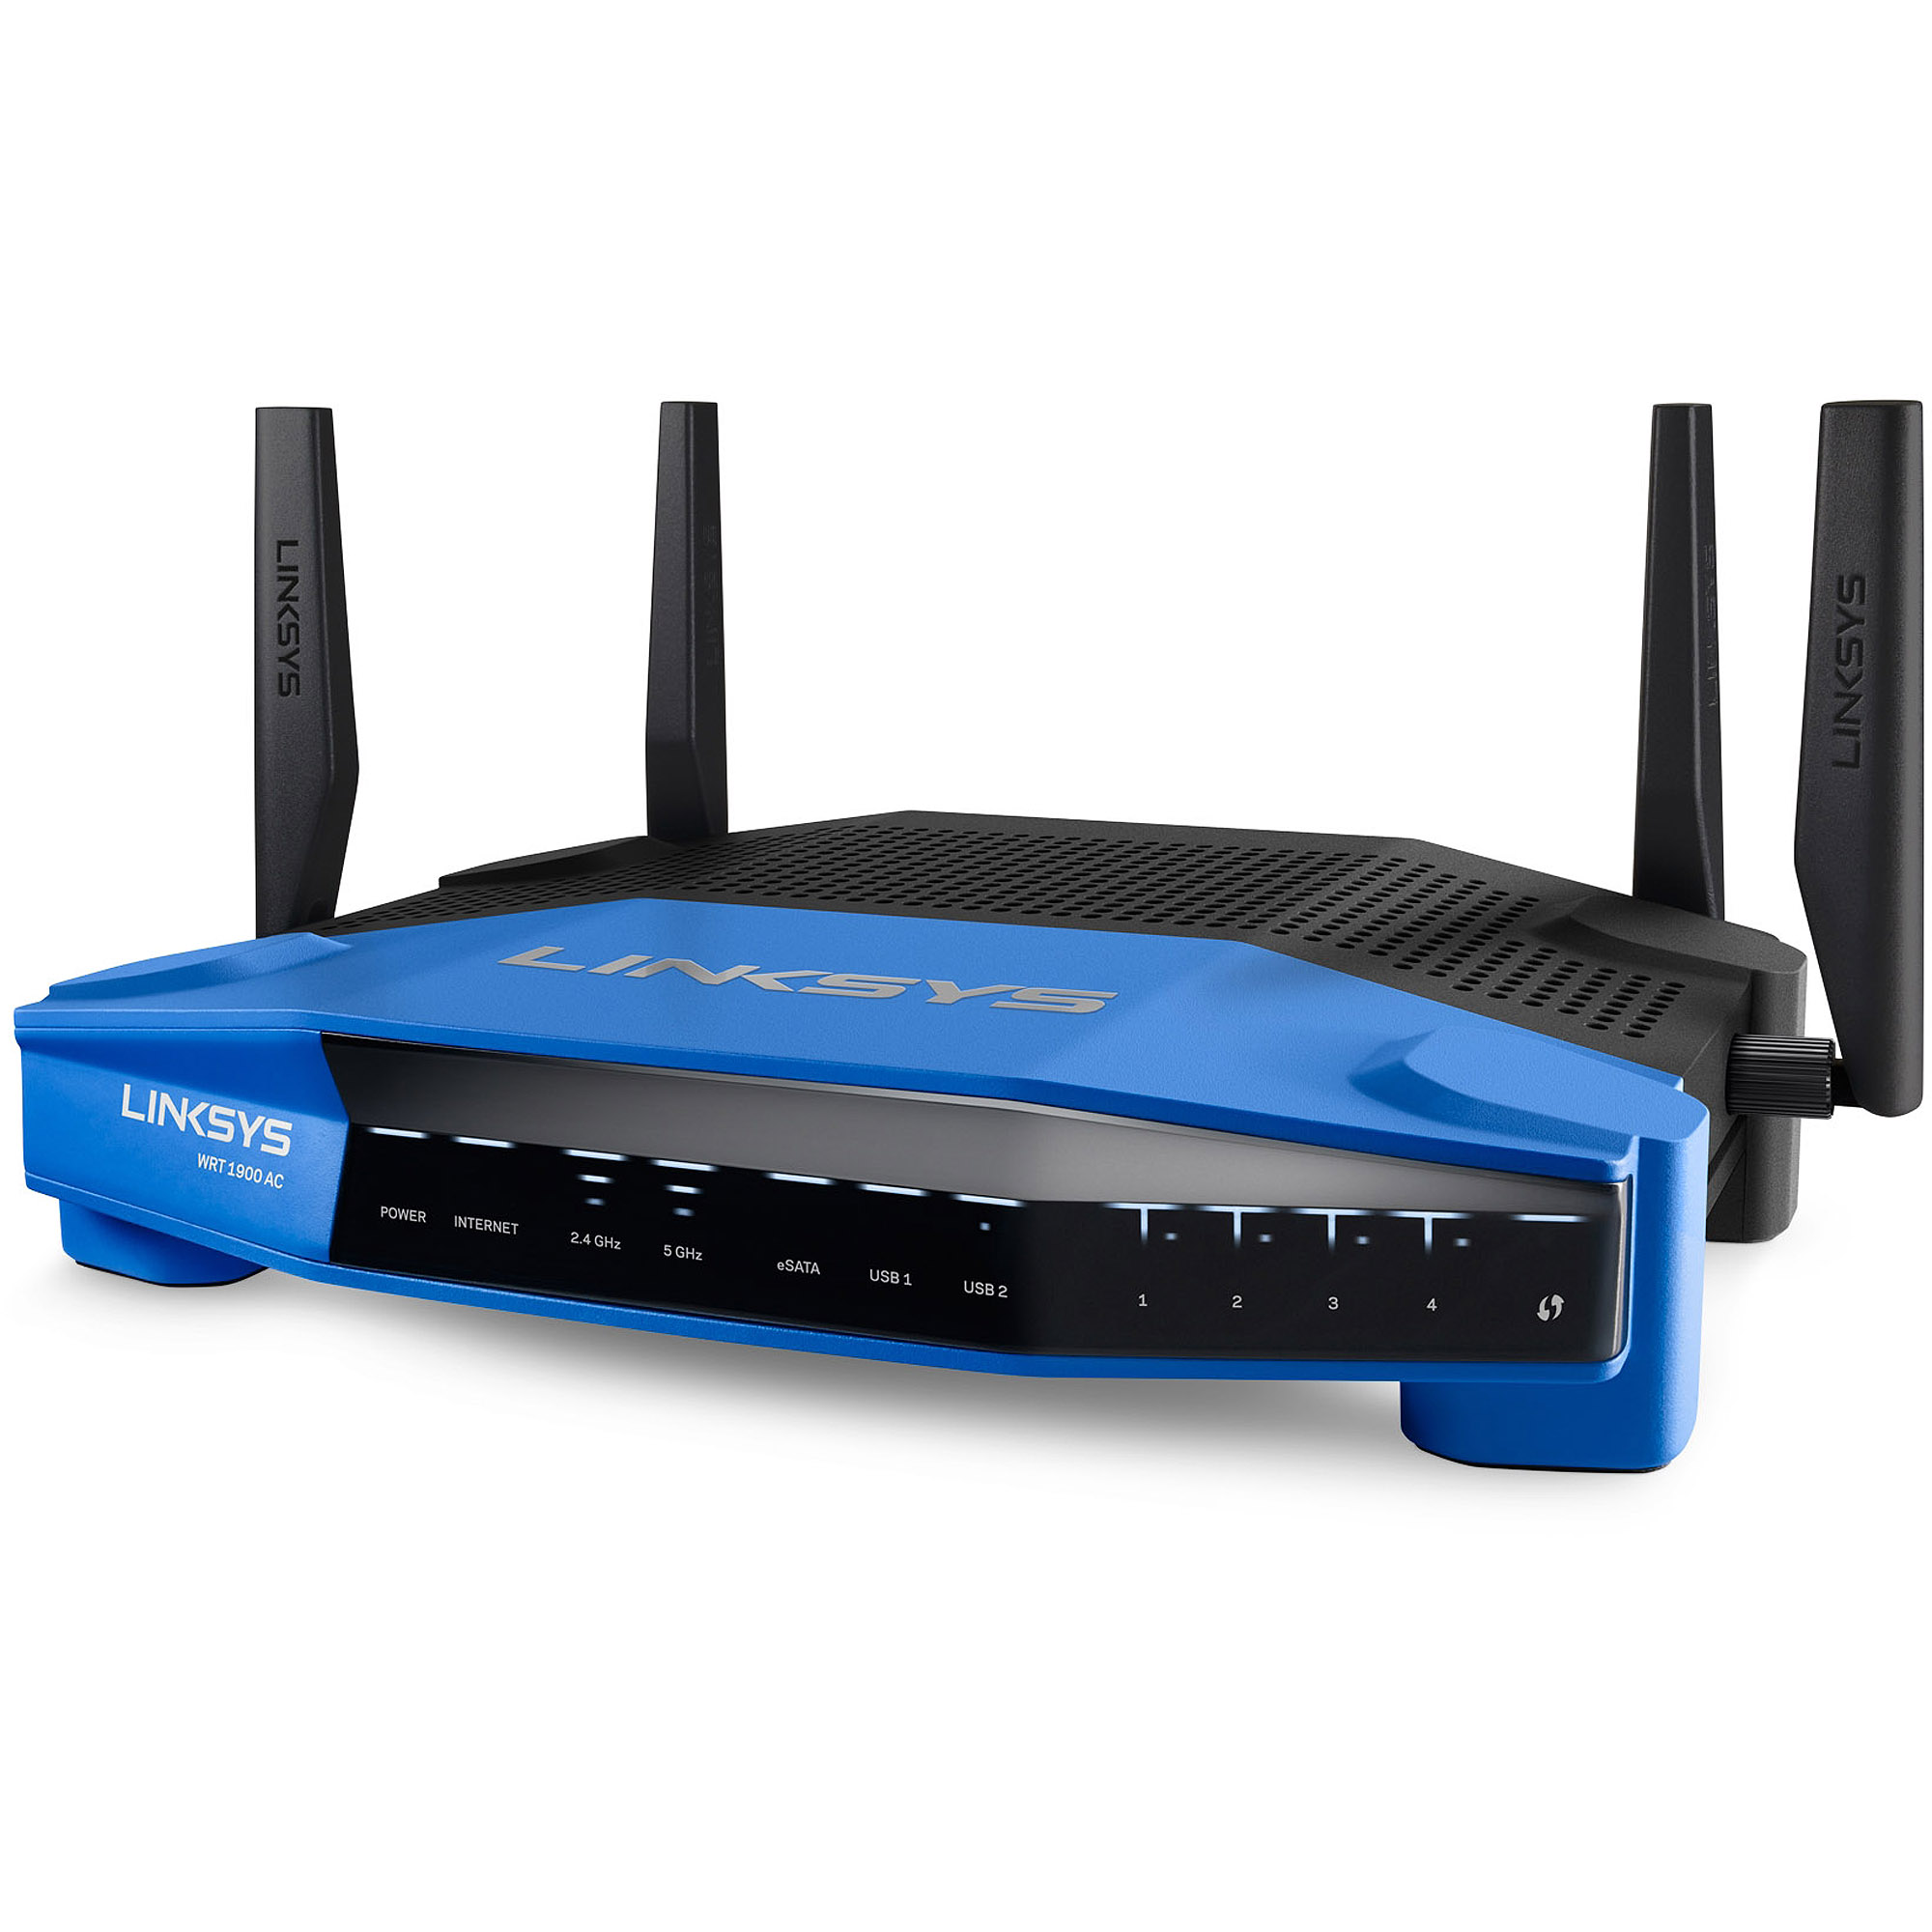 Linksys Dual-Band AC1900 Wireless Wi-Fi Router (WRT1900AC) - image 3 of 4